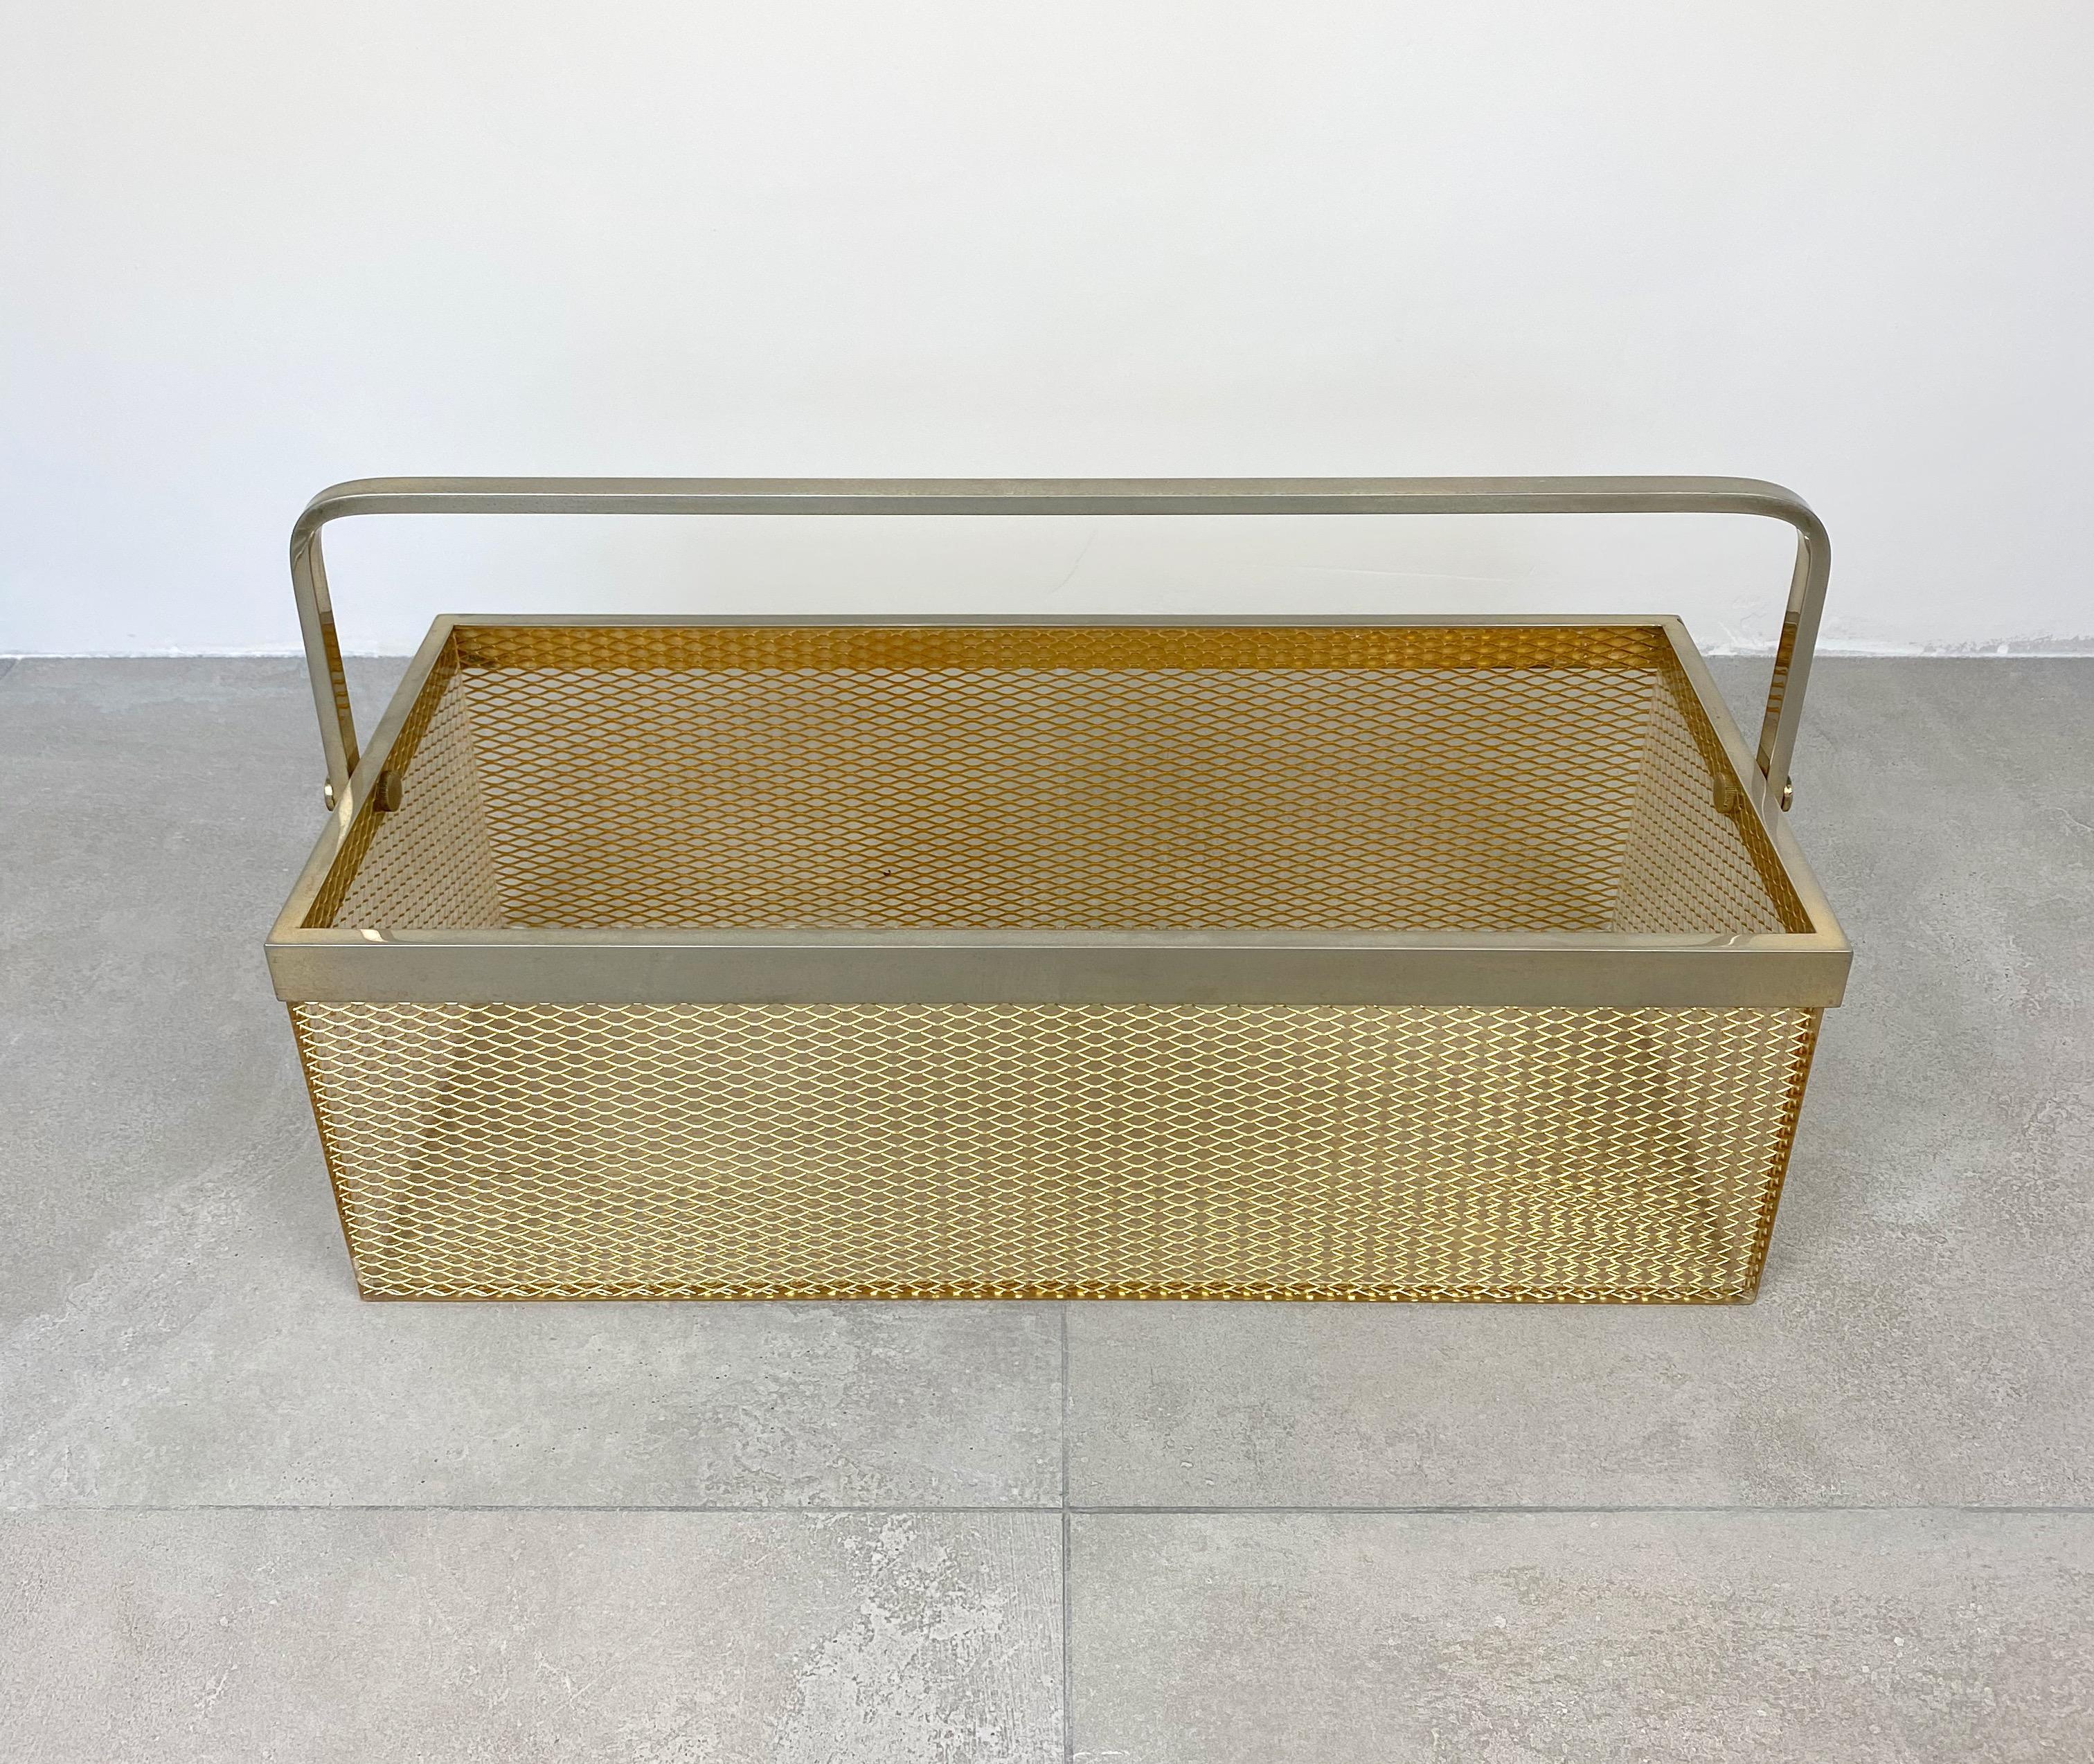 Mid-Century Modern Magazine Holder Rack in Nickel and Netting Lucite, Italy, 1970s For Sale